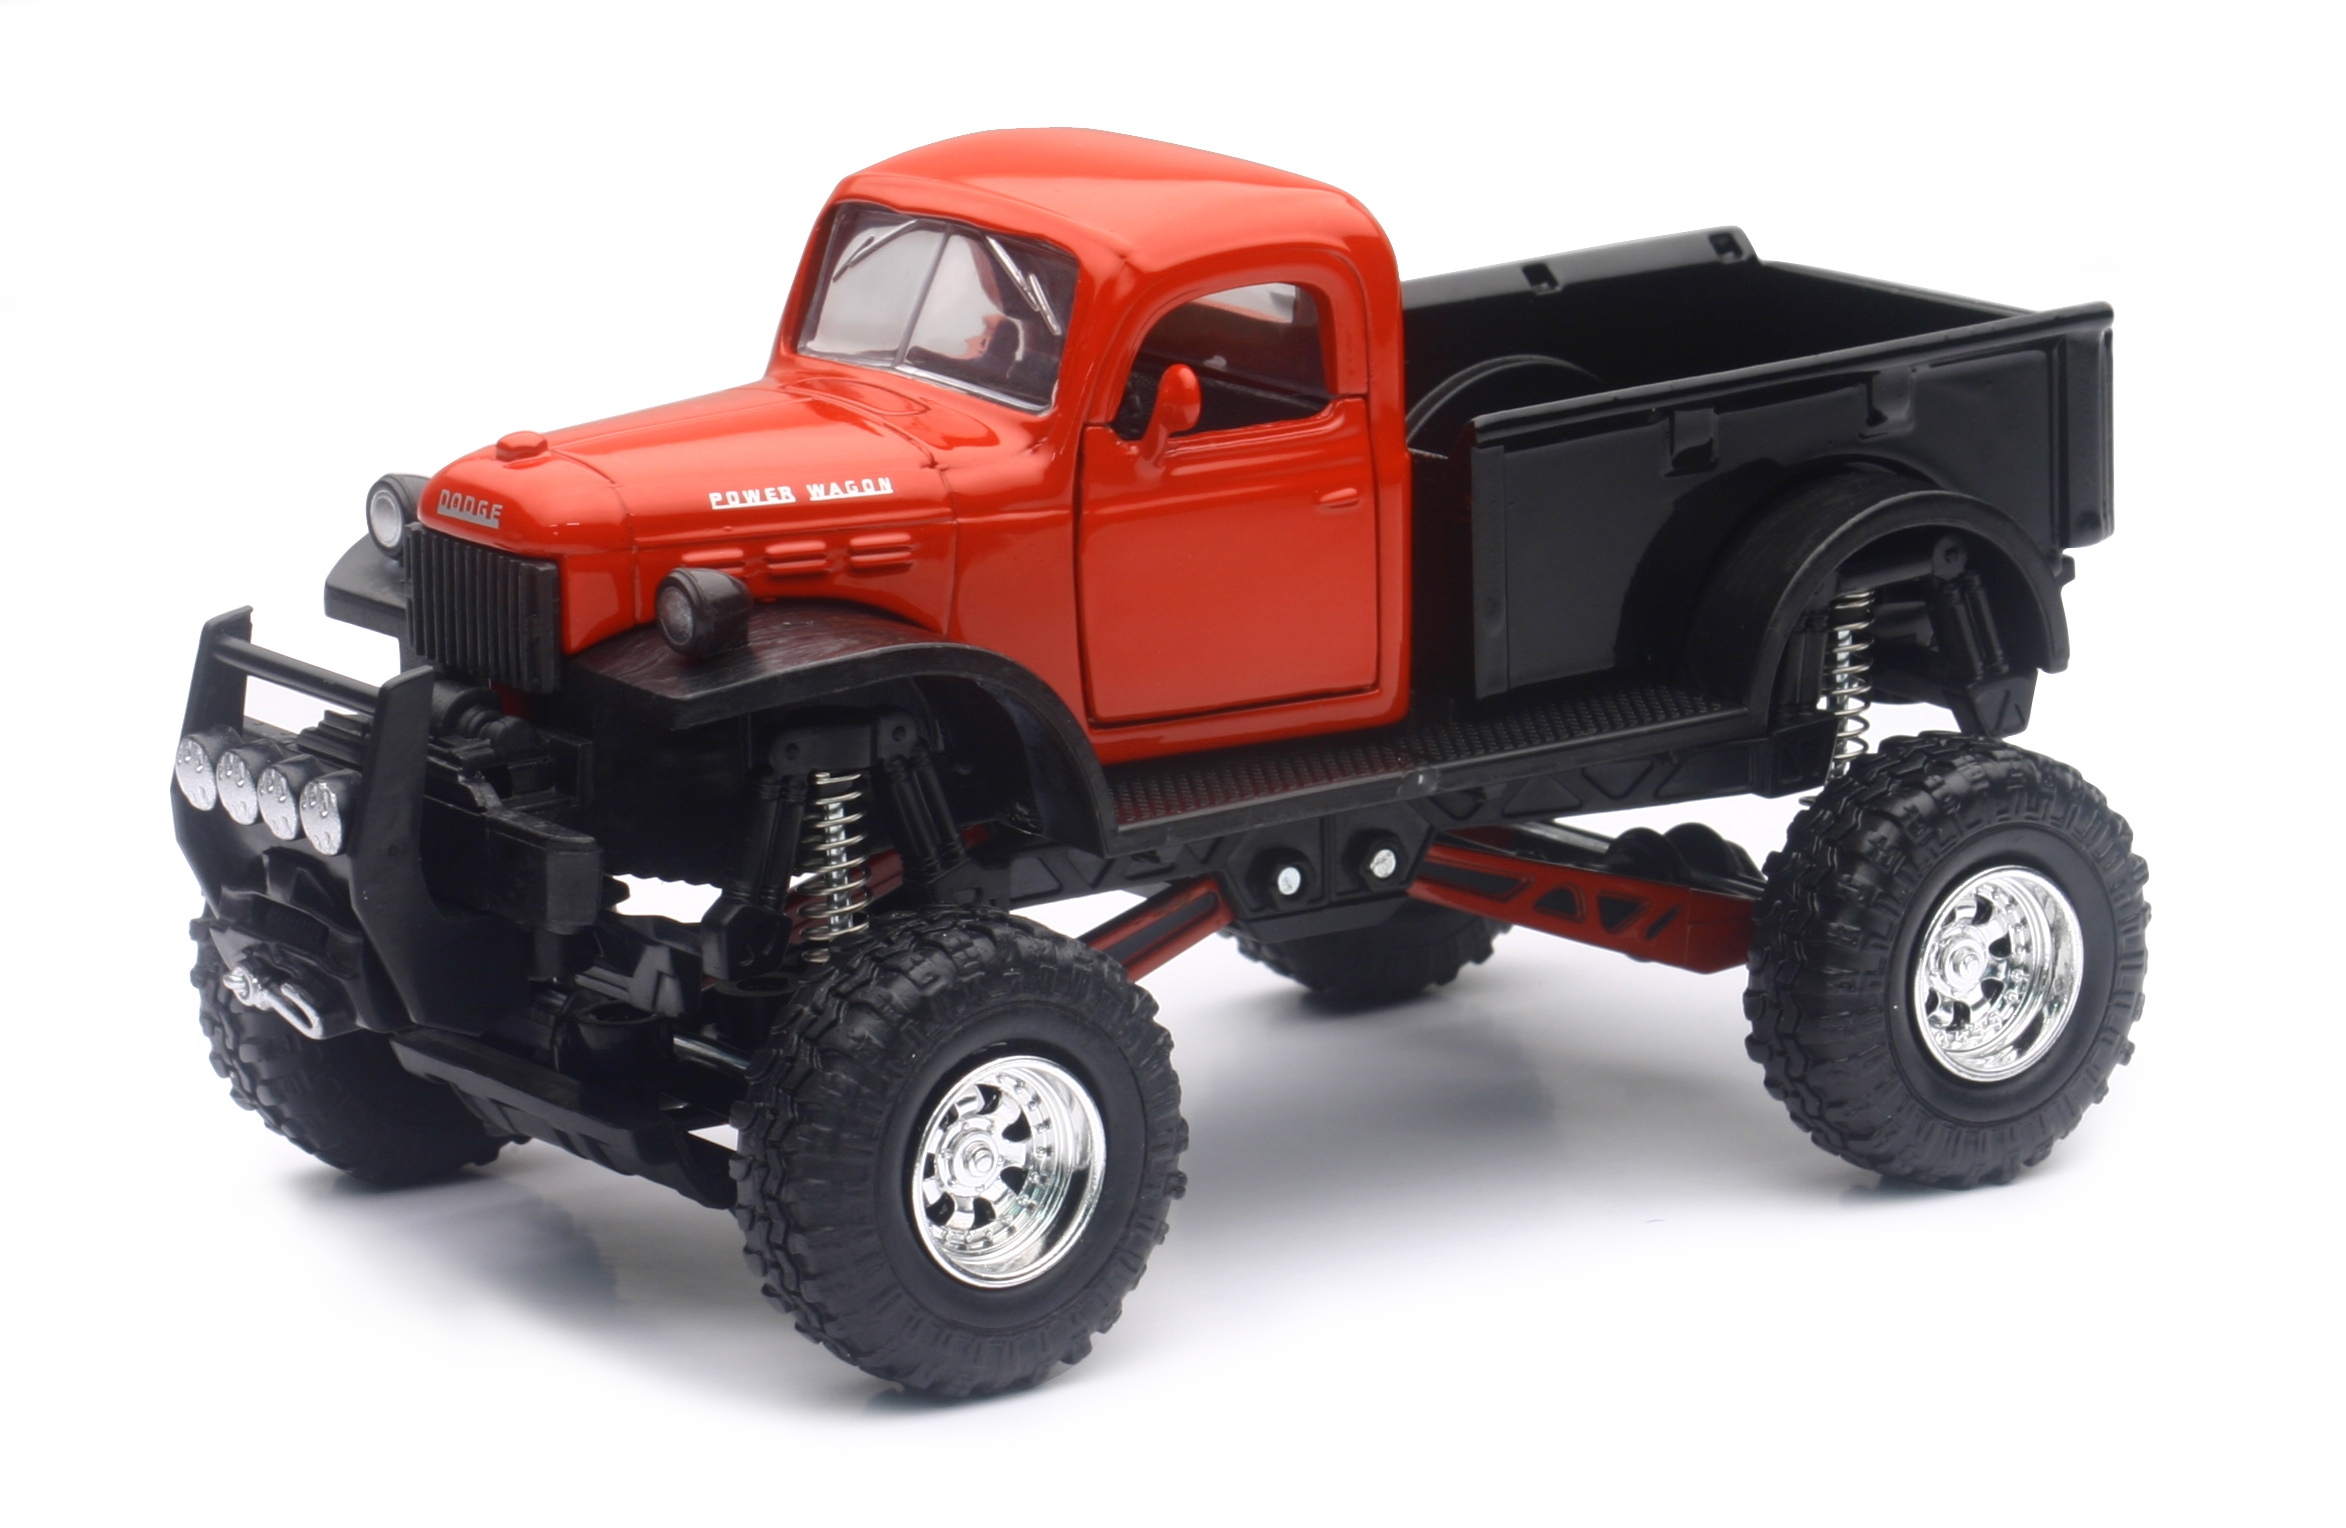 Murdoch's - New Ray Toys - Xtreme Adventure 1:32 Scale 4x4 Truck - Ass...